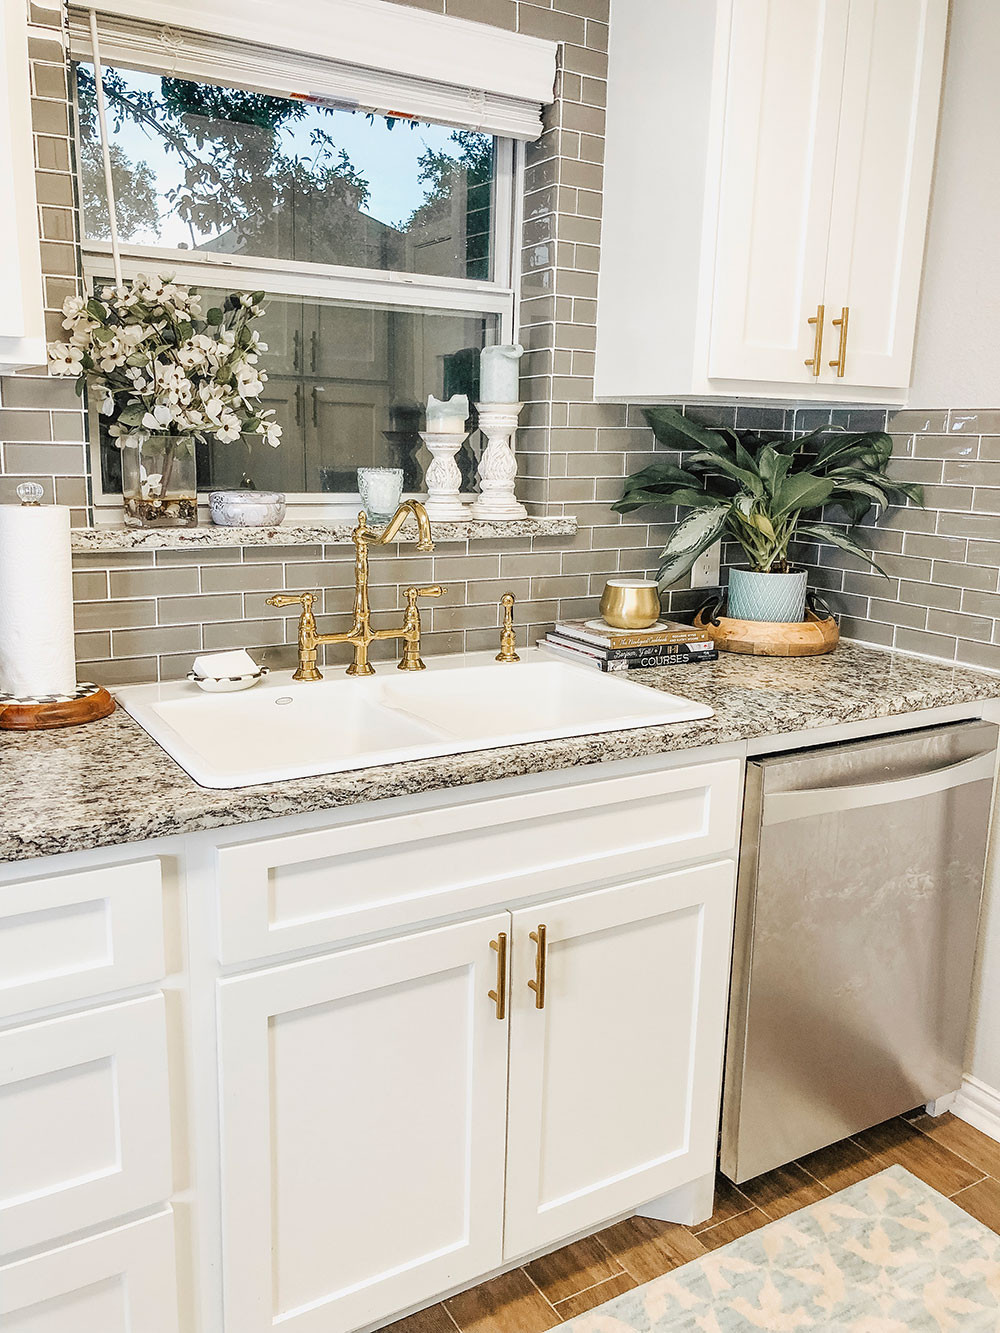 Small Kitchen Sink Ideas Lovely Our Kitchen Sink Woes Our Small Kitchen Reveal